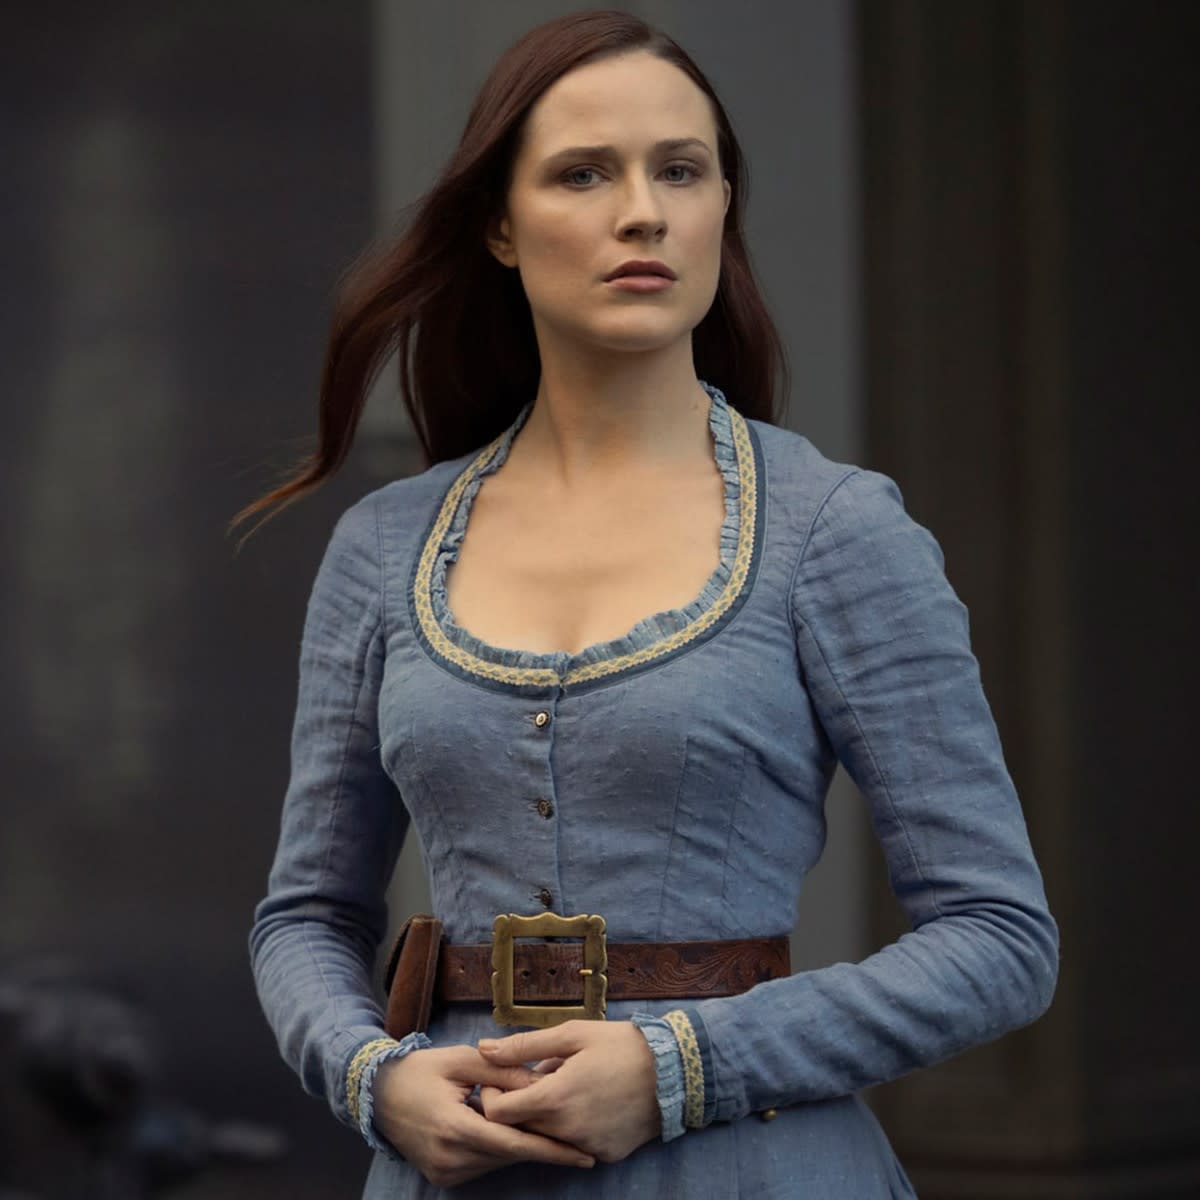 Westworld Executive Producer Lisa Joy Responds to Fan Frustrations Over Show’s Unclear Meaning - Yahoo Entertainment